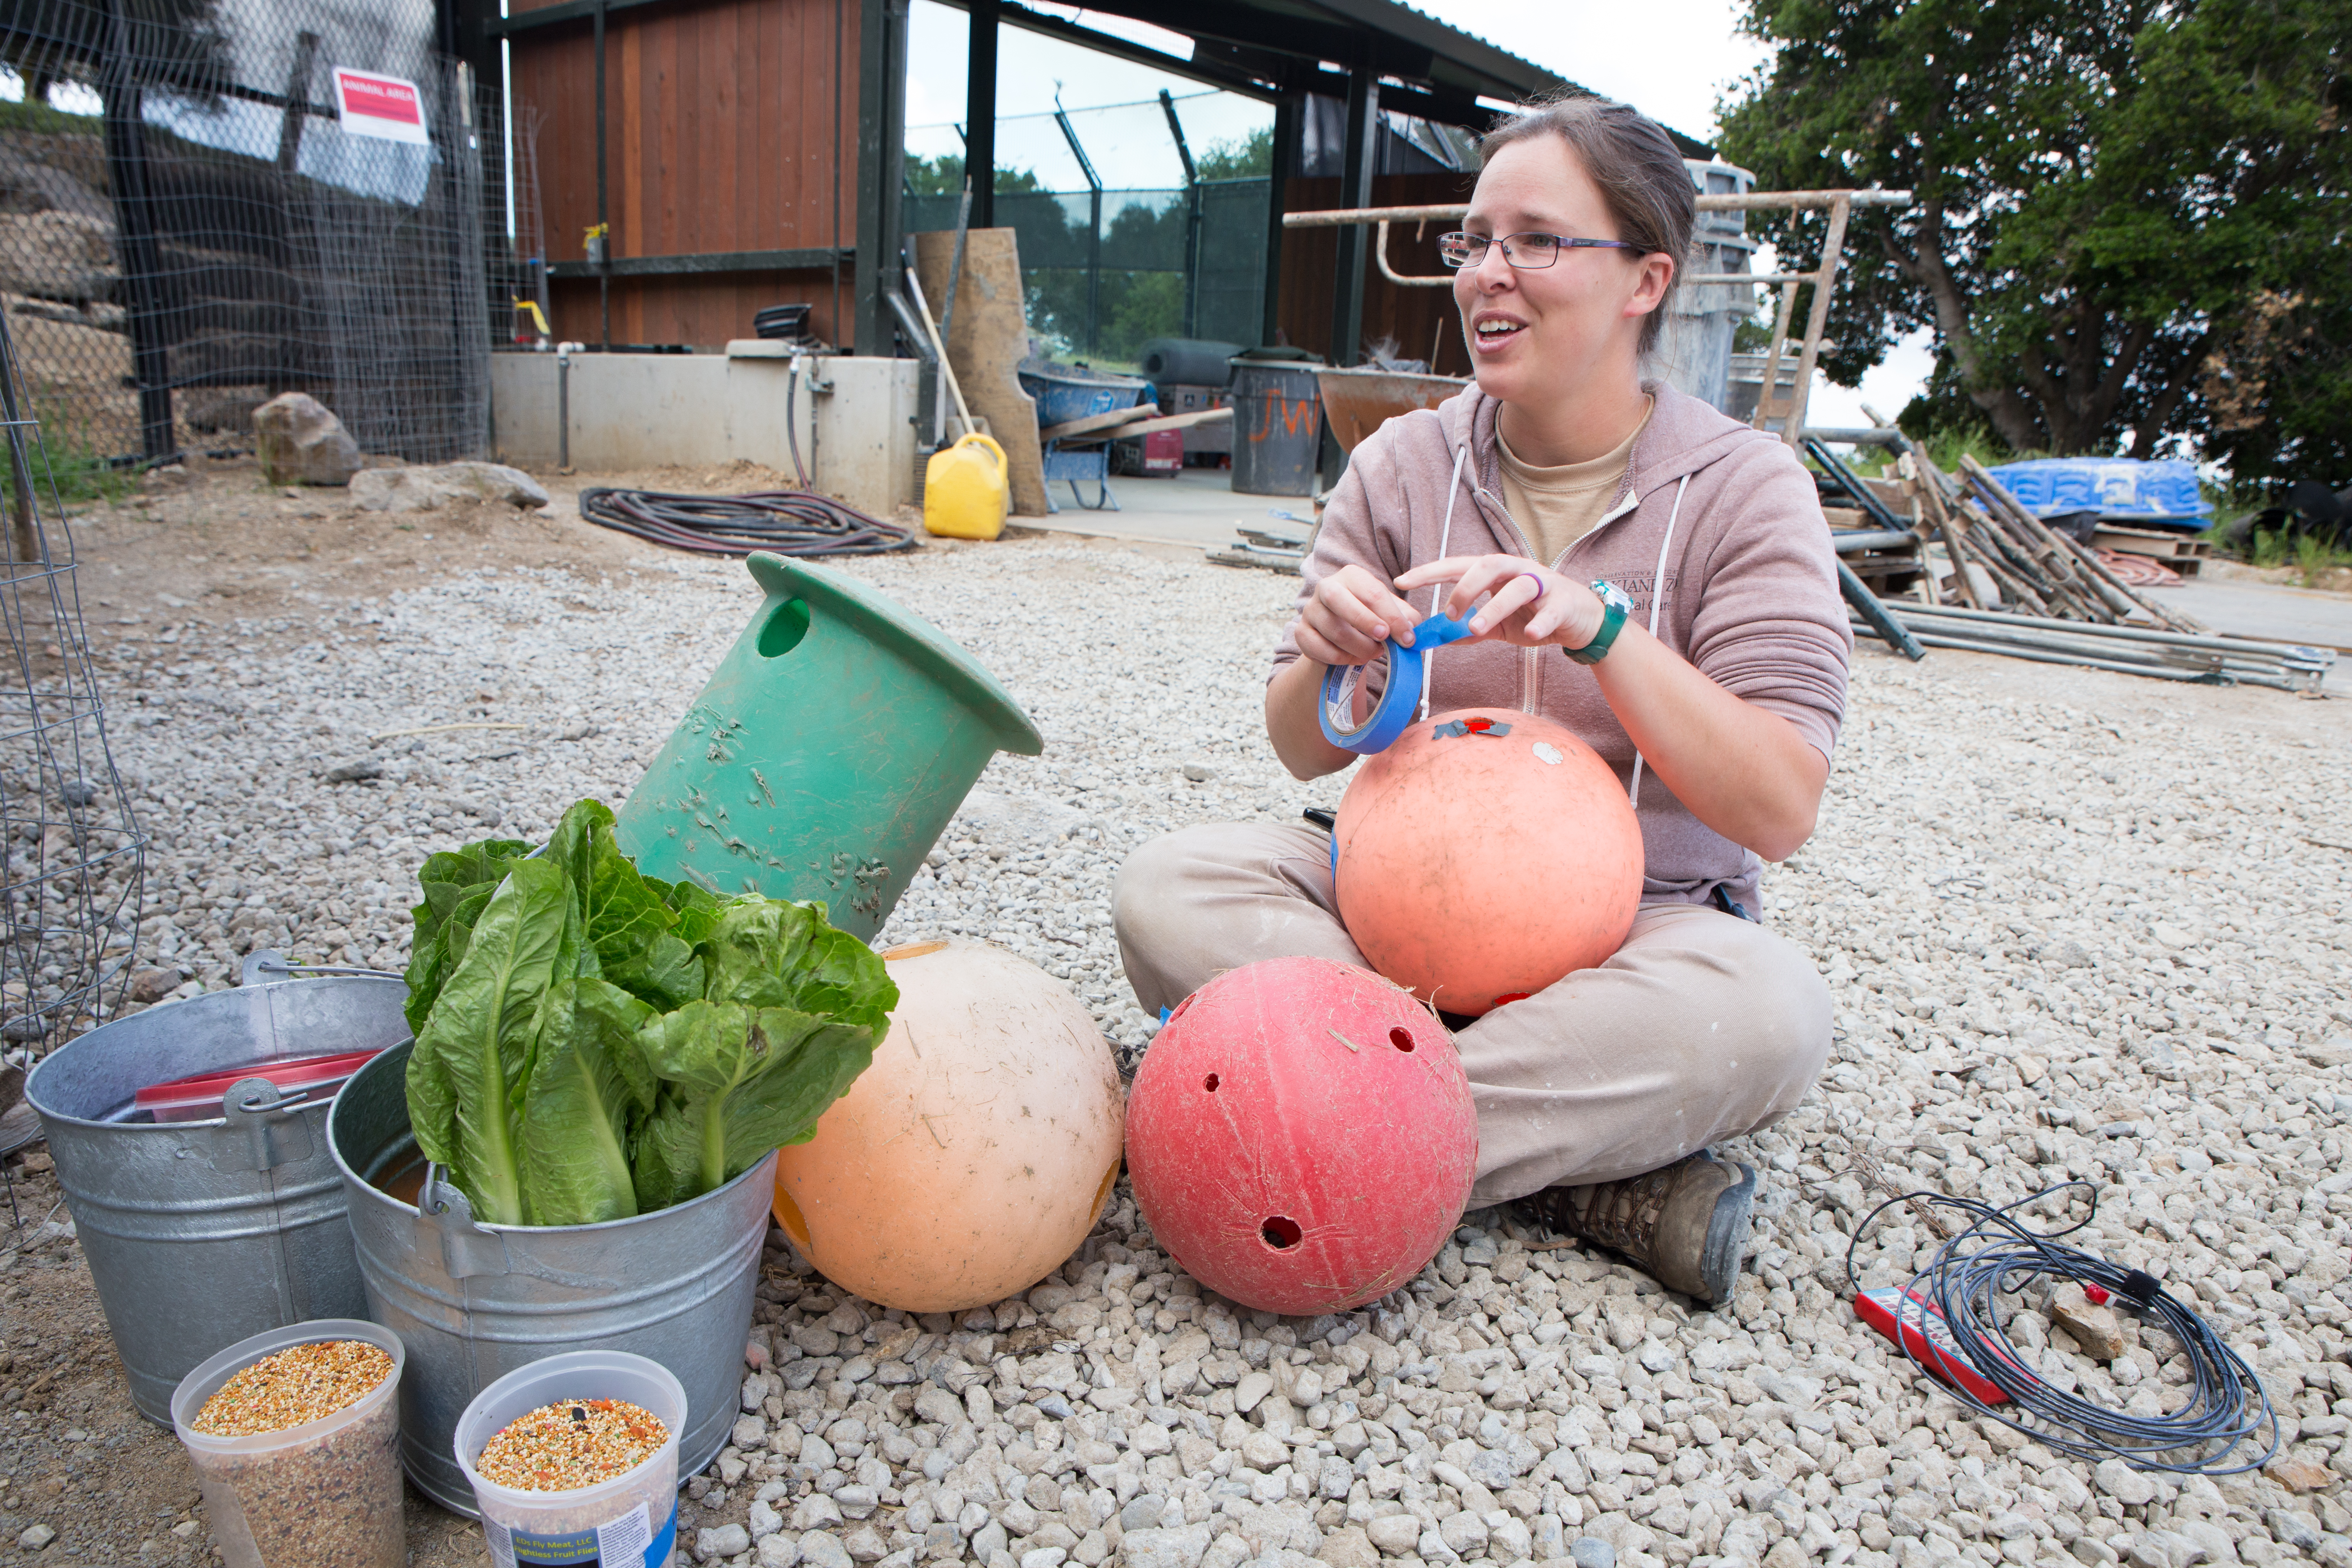 Heather Paddock, a zookeeper for the Oakland Zoo's new exhibit, prepares a food enrichment activity for the zoo's four black bears. She pours bird seed and mealworms into large round containers and tapes off the holes to make it harder for the bears to get the food.